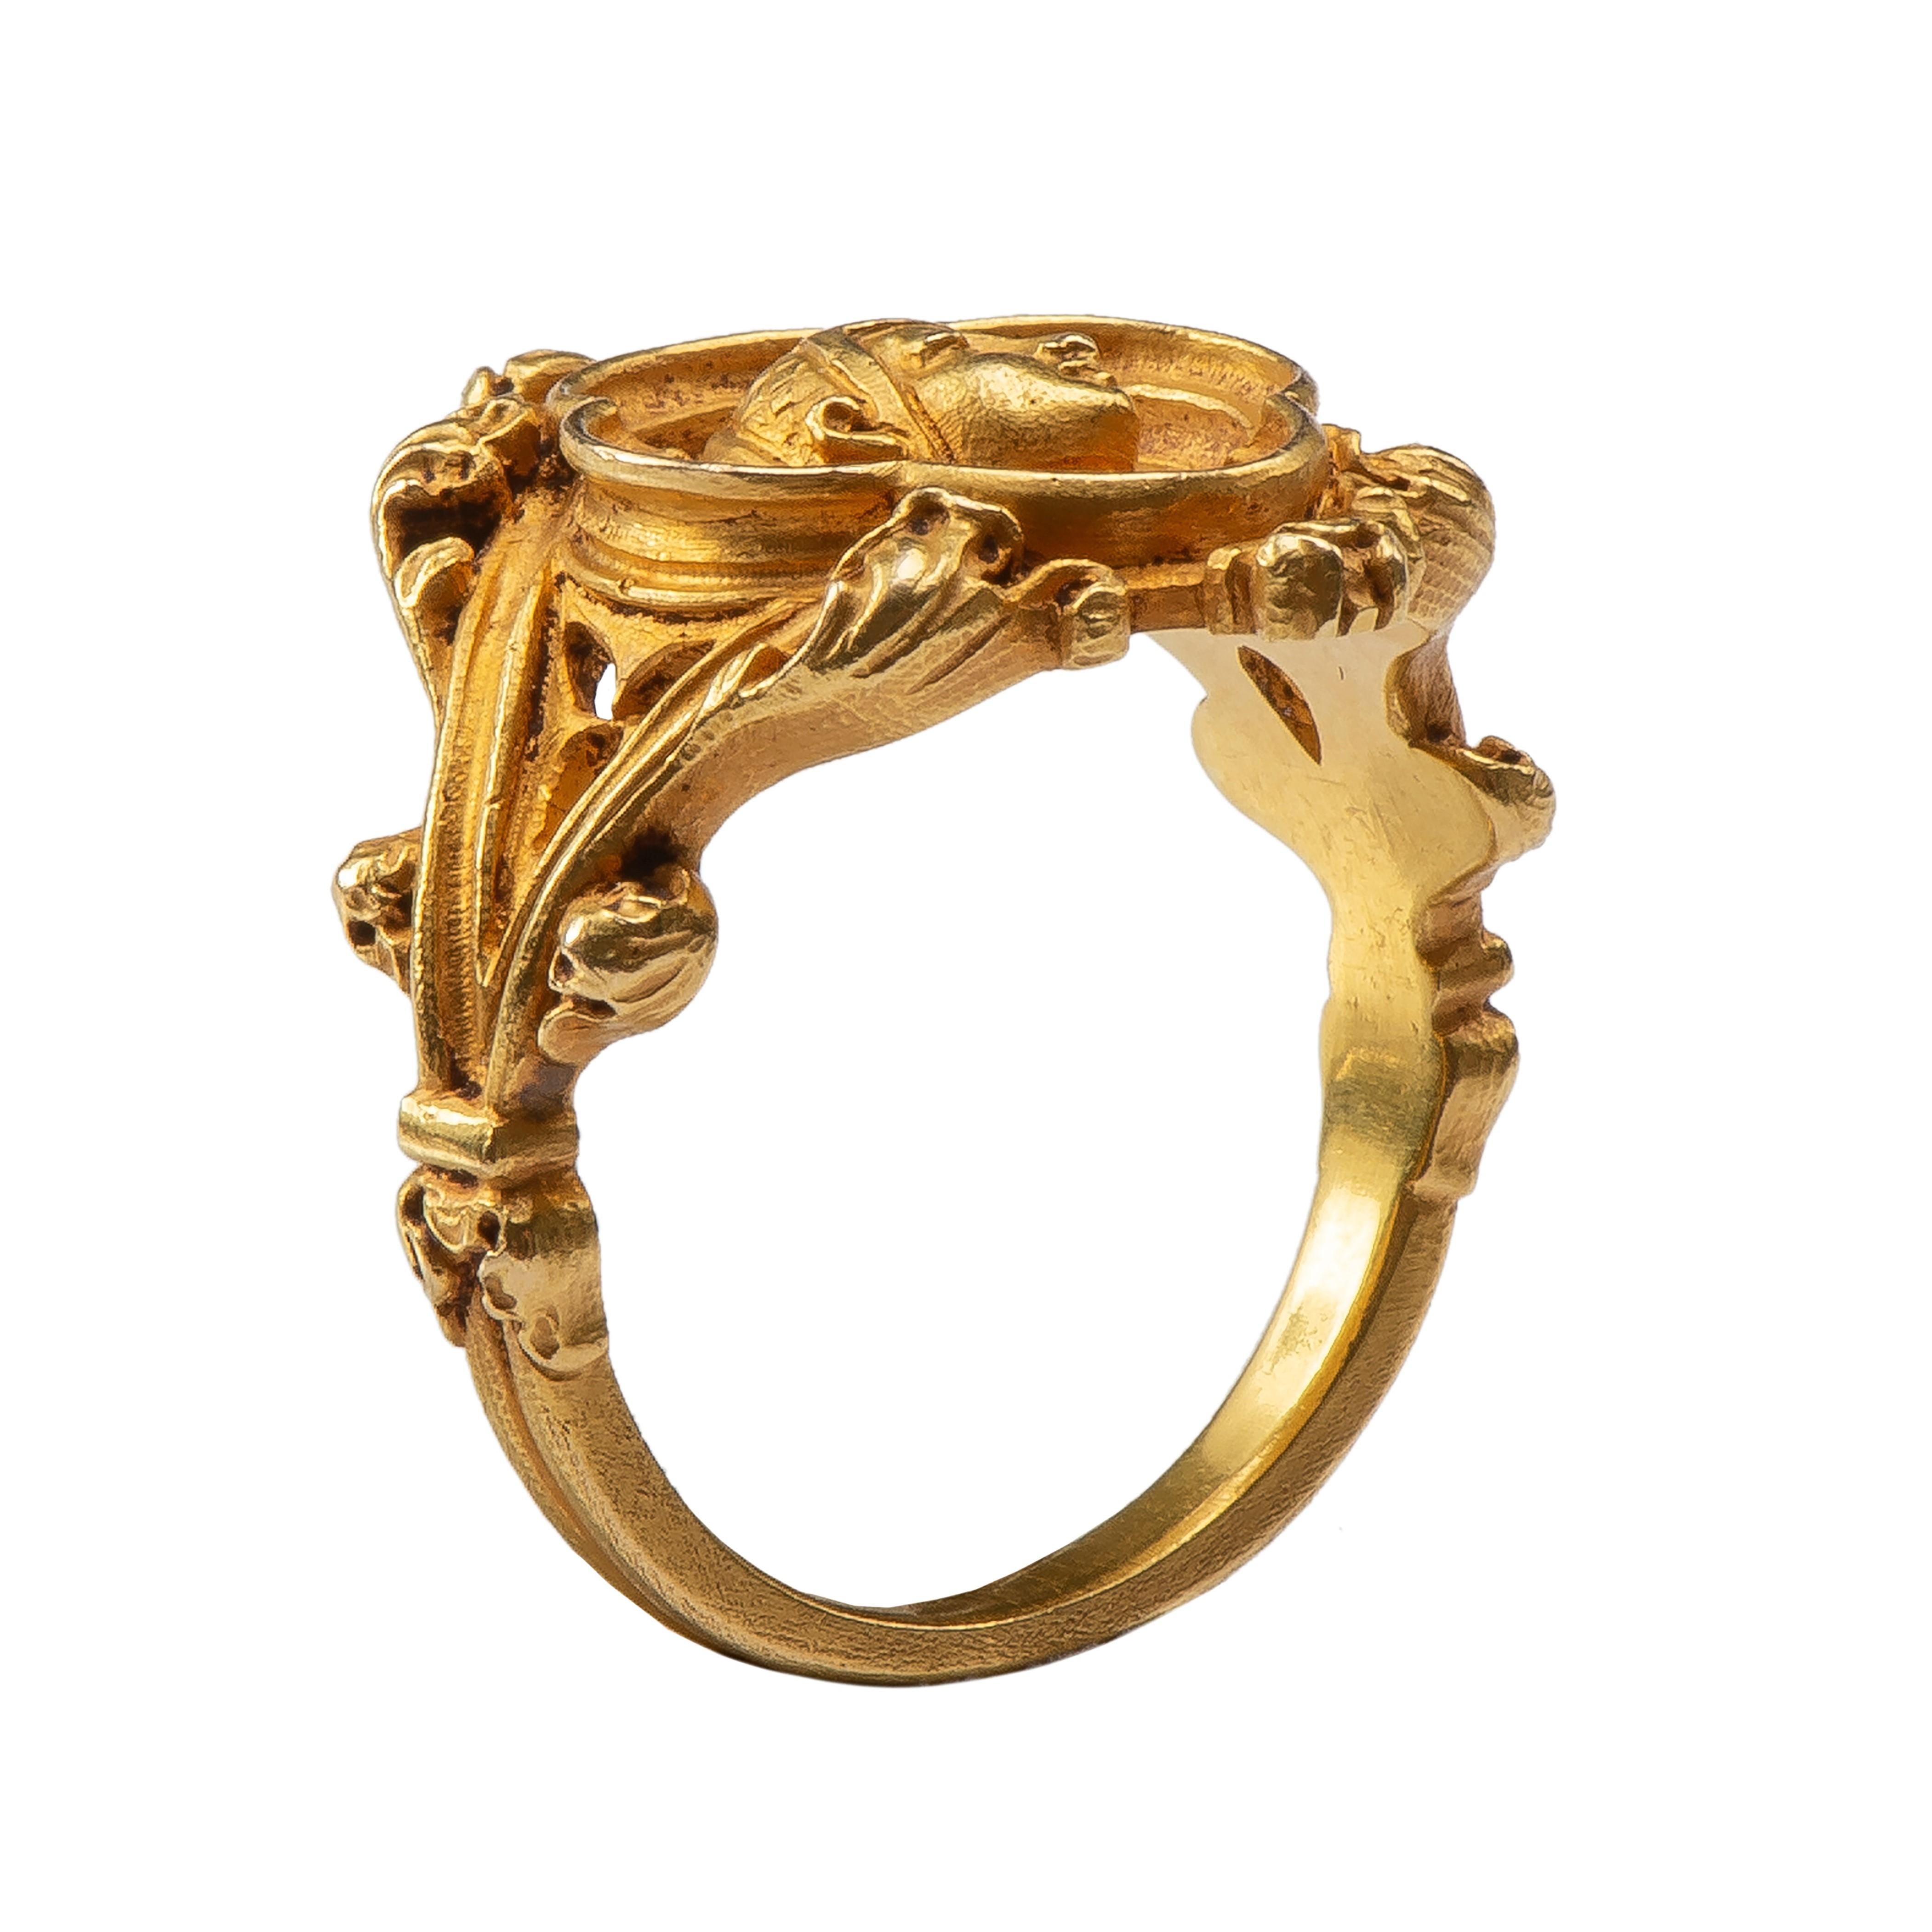 Gothic Revival Gold Ring with Joan of Arc by Louis Wièse, Late 19th Century In Good Condition For Sale In Chicago, IL